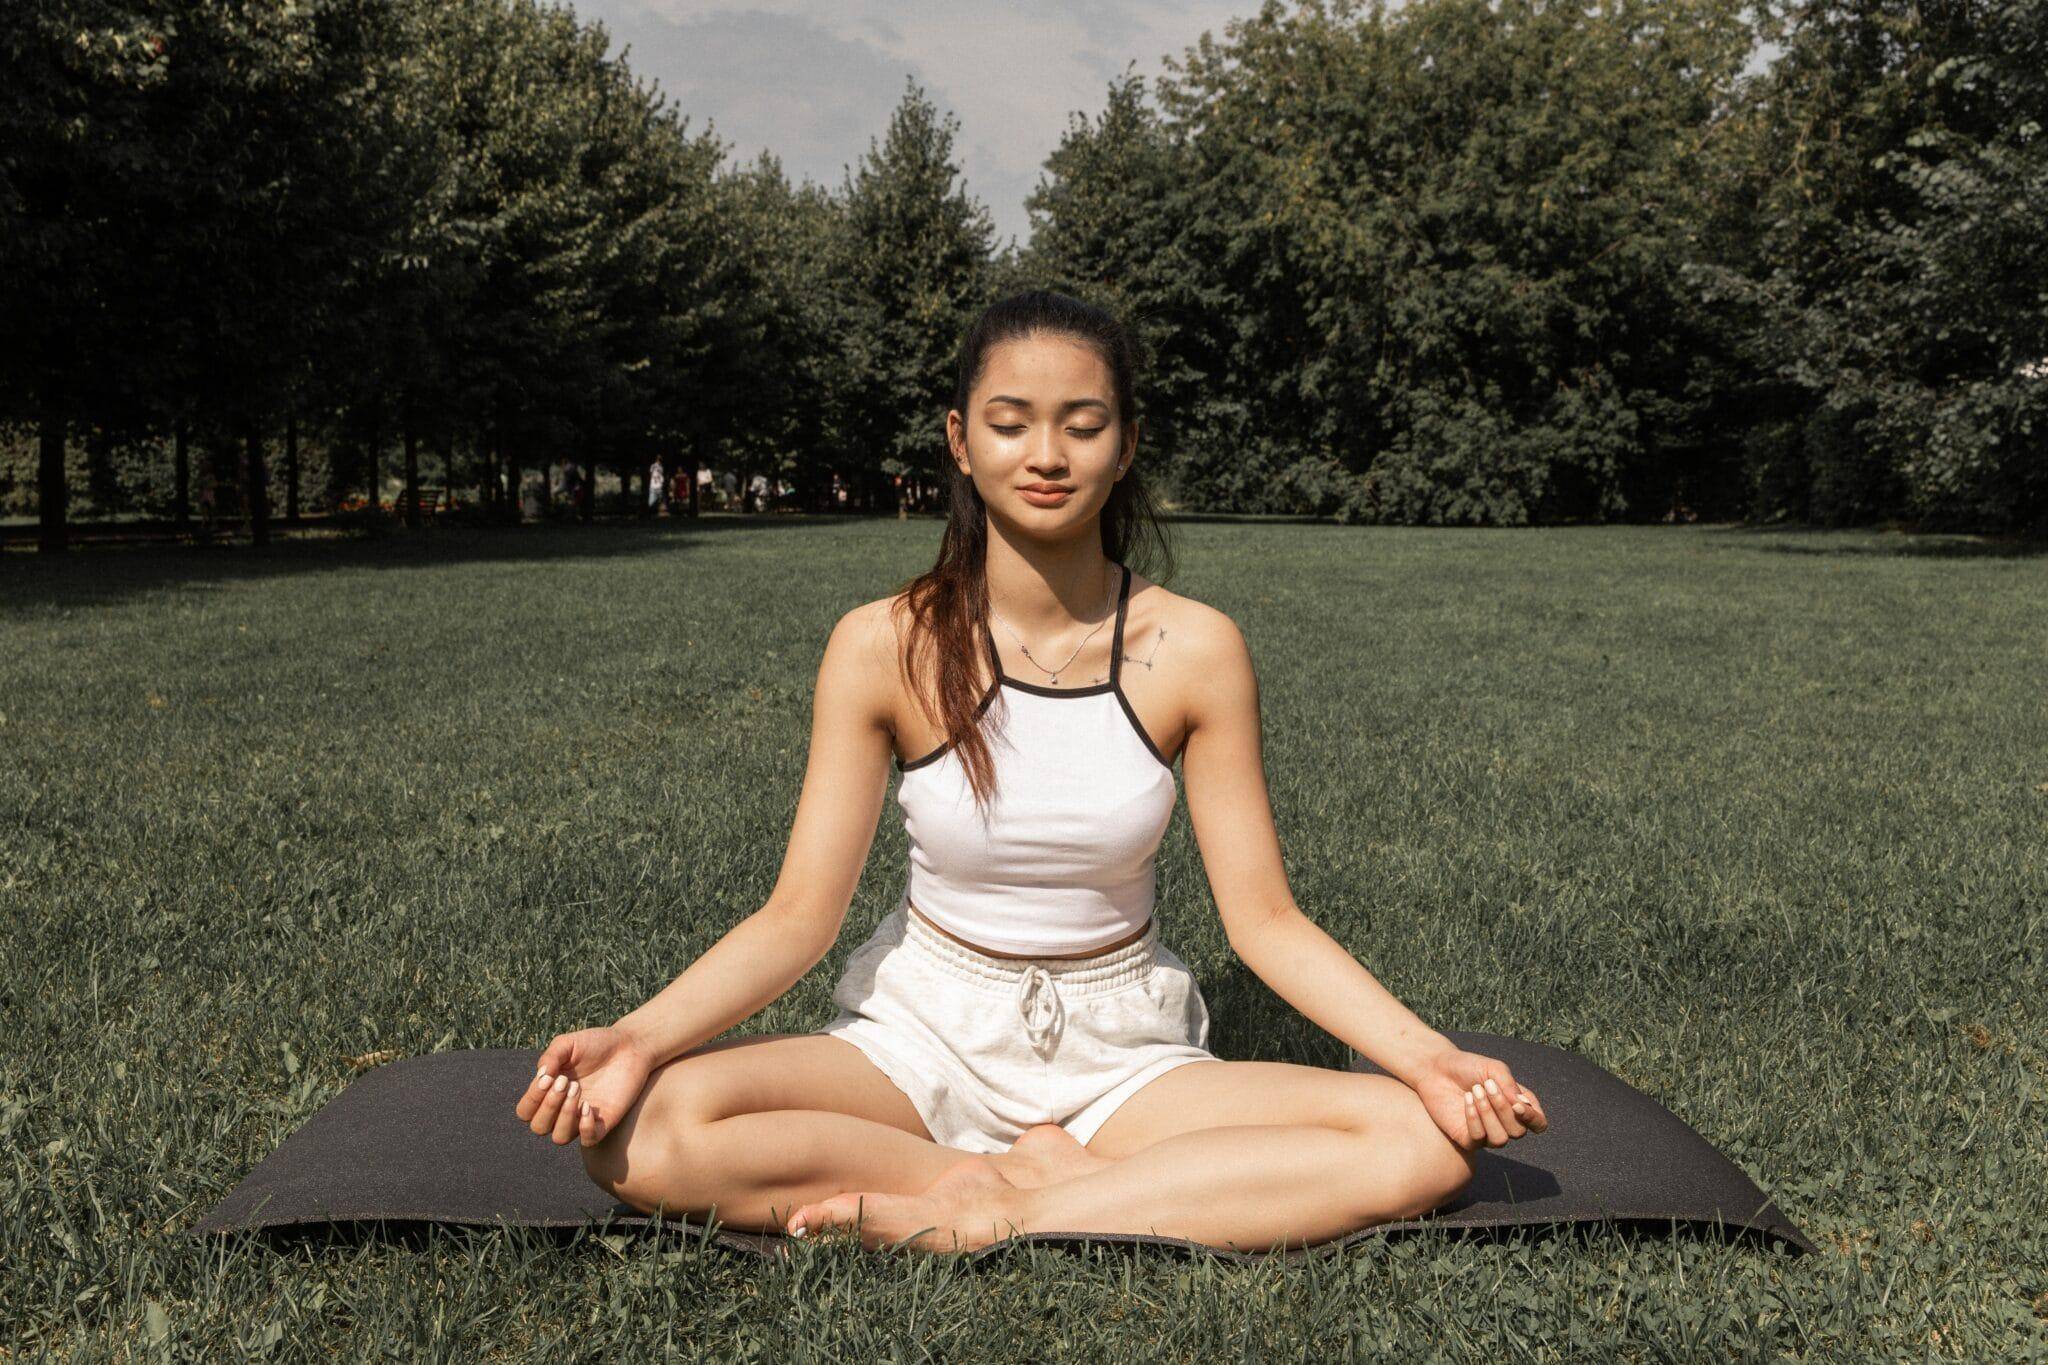 how to meditate for beginners